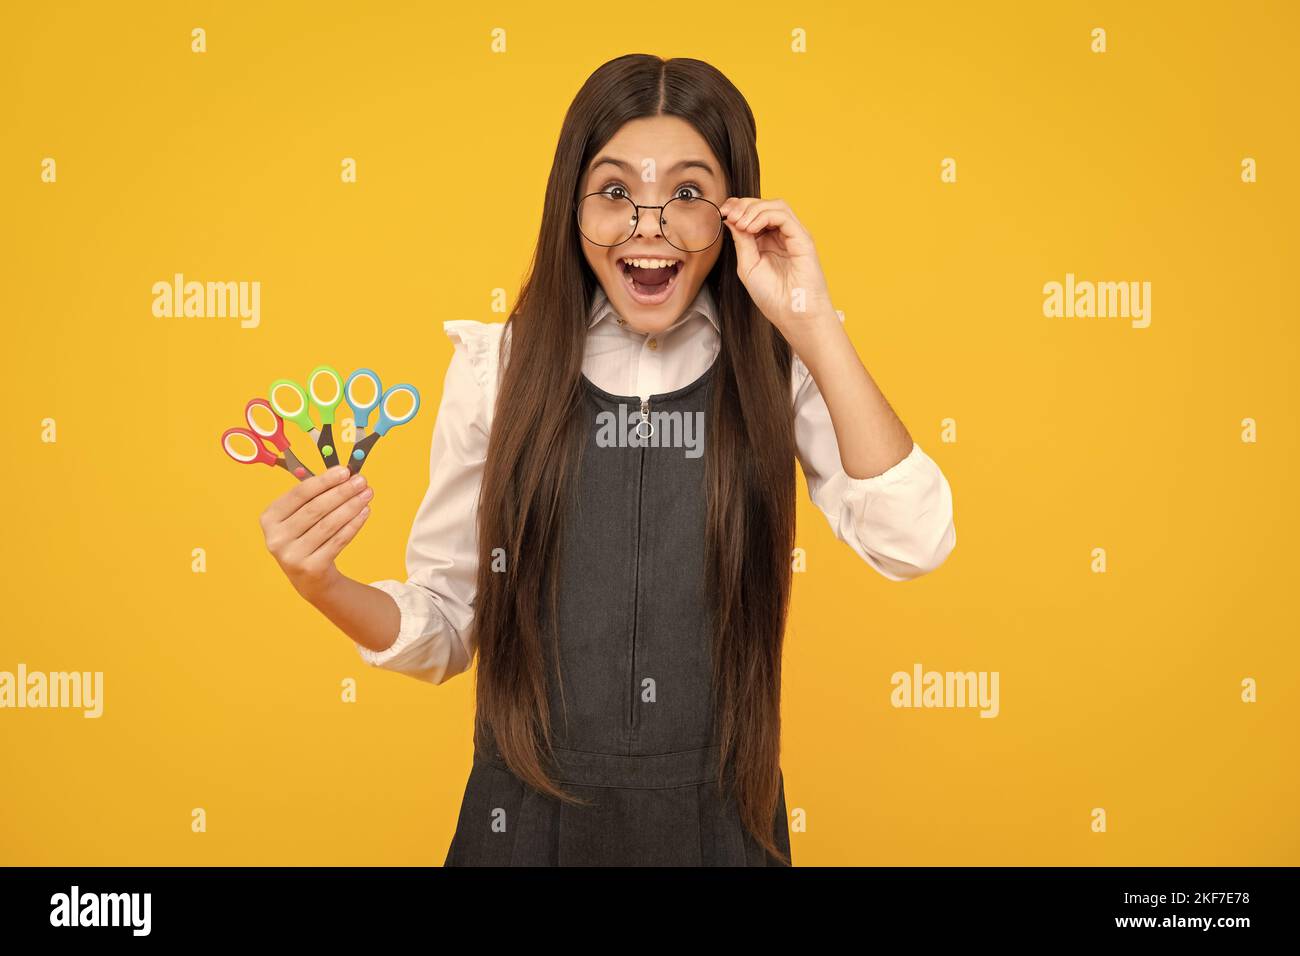 Excited amazed teenage girl with scissors, isolated on yellow background. Child creativity, arts and crafts. Stock Photo